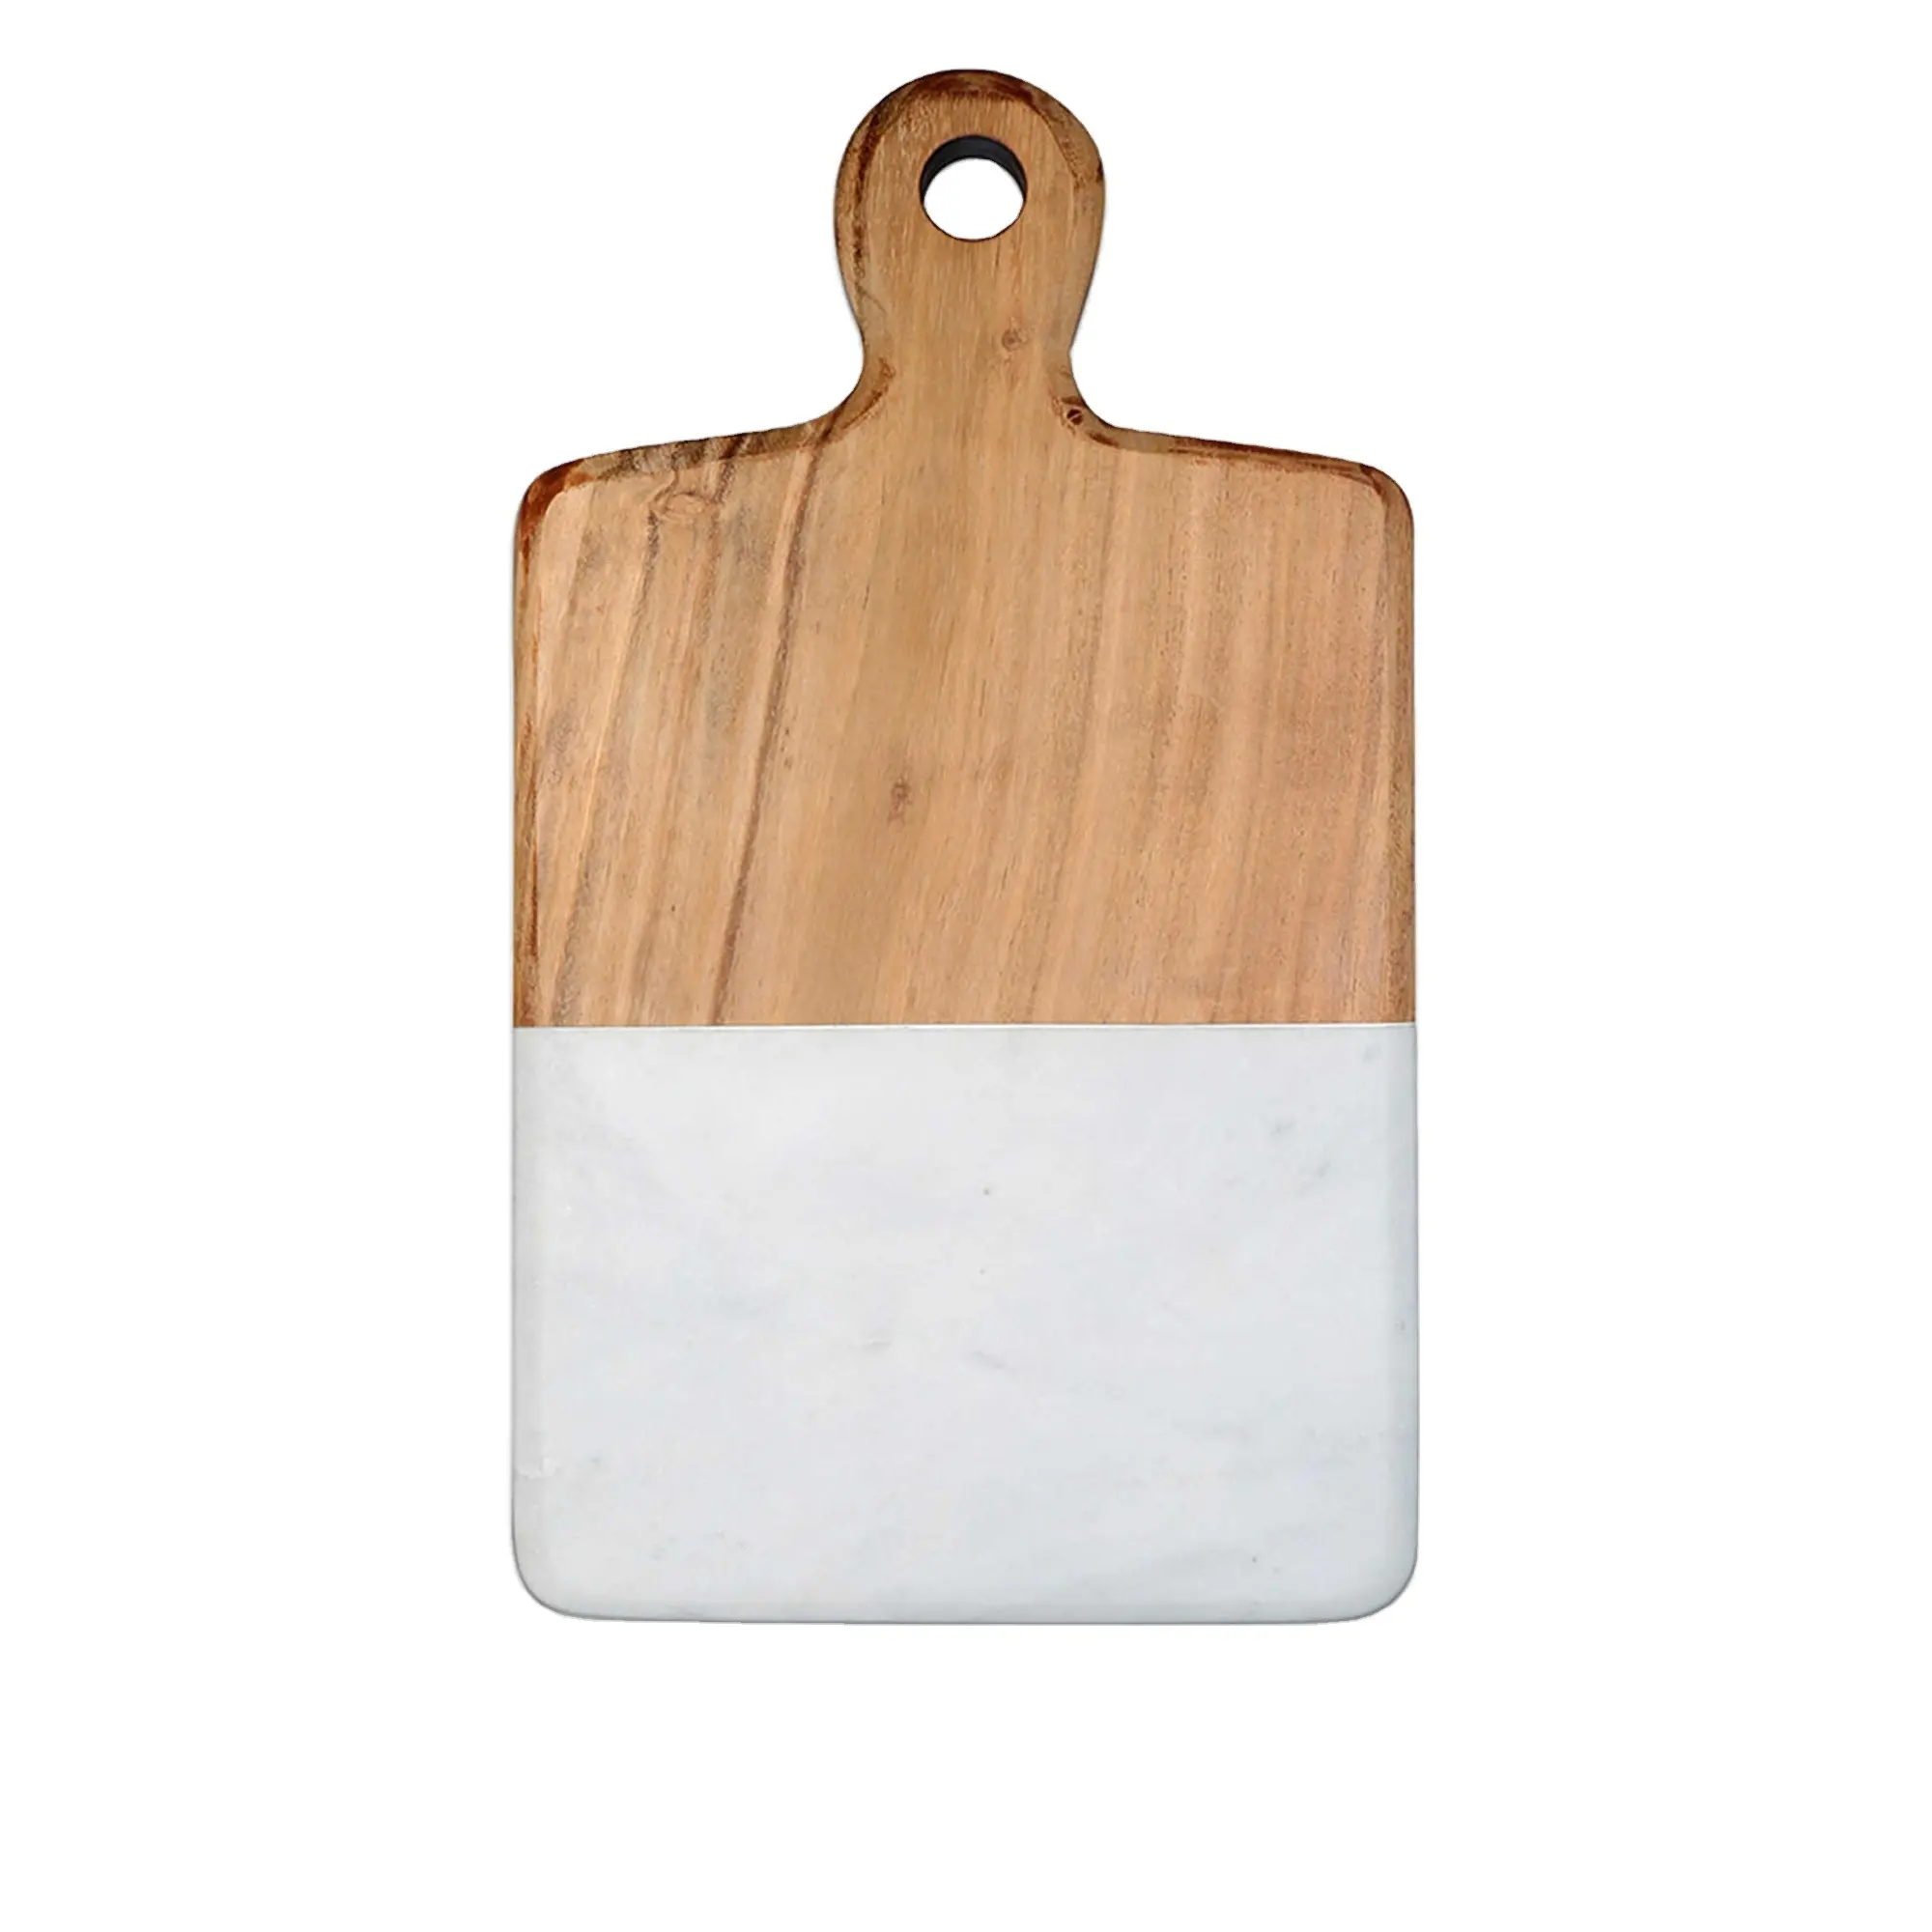 Artisanal Kitchen Chopping Board Marble And Wooden Cutting Board NonのPerfect Shape Chopper For Sale